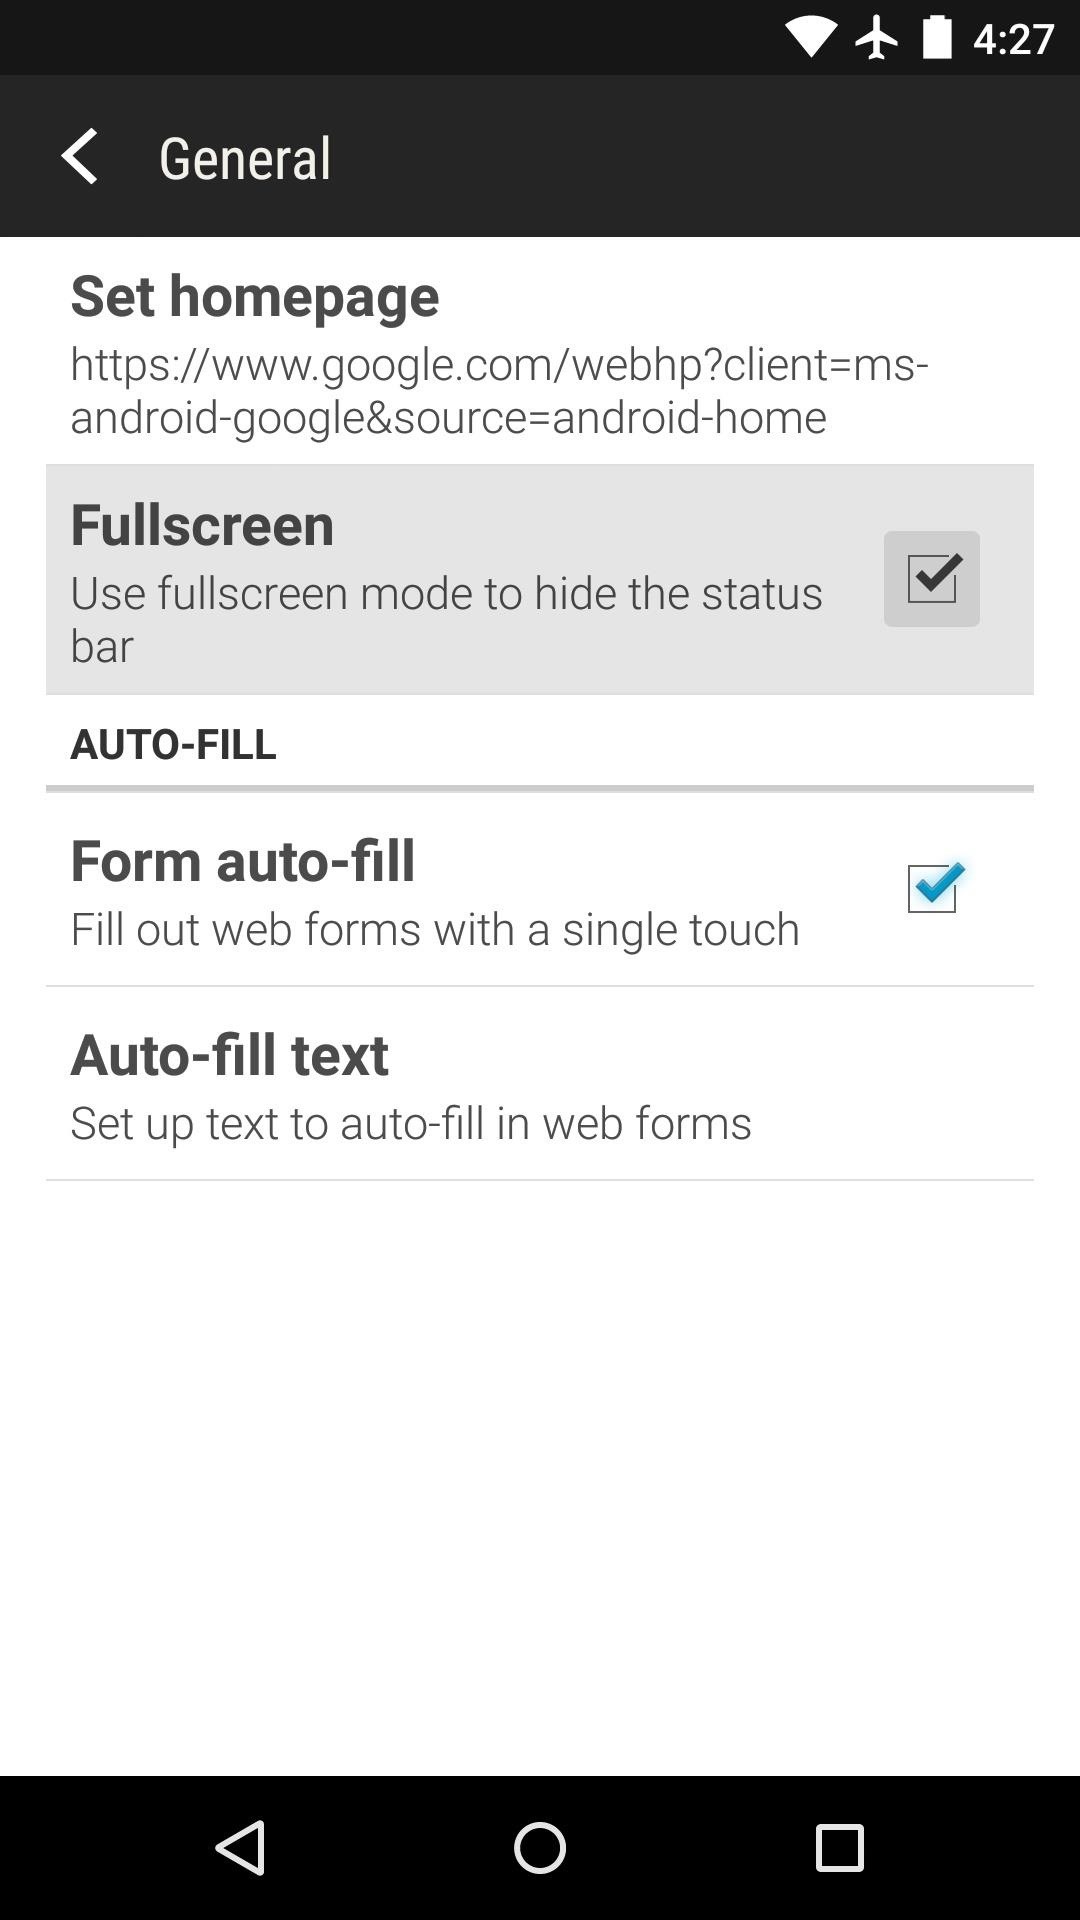 How to Install HTC's Sense Browser on Any Lollipop Device